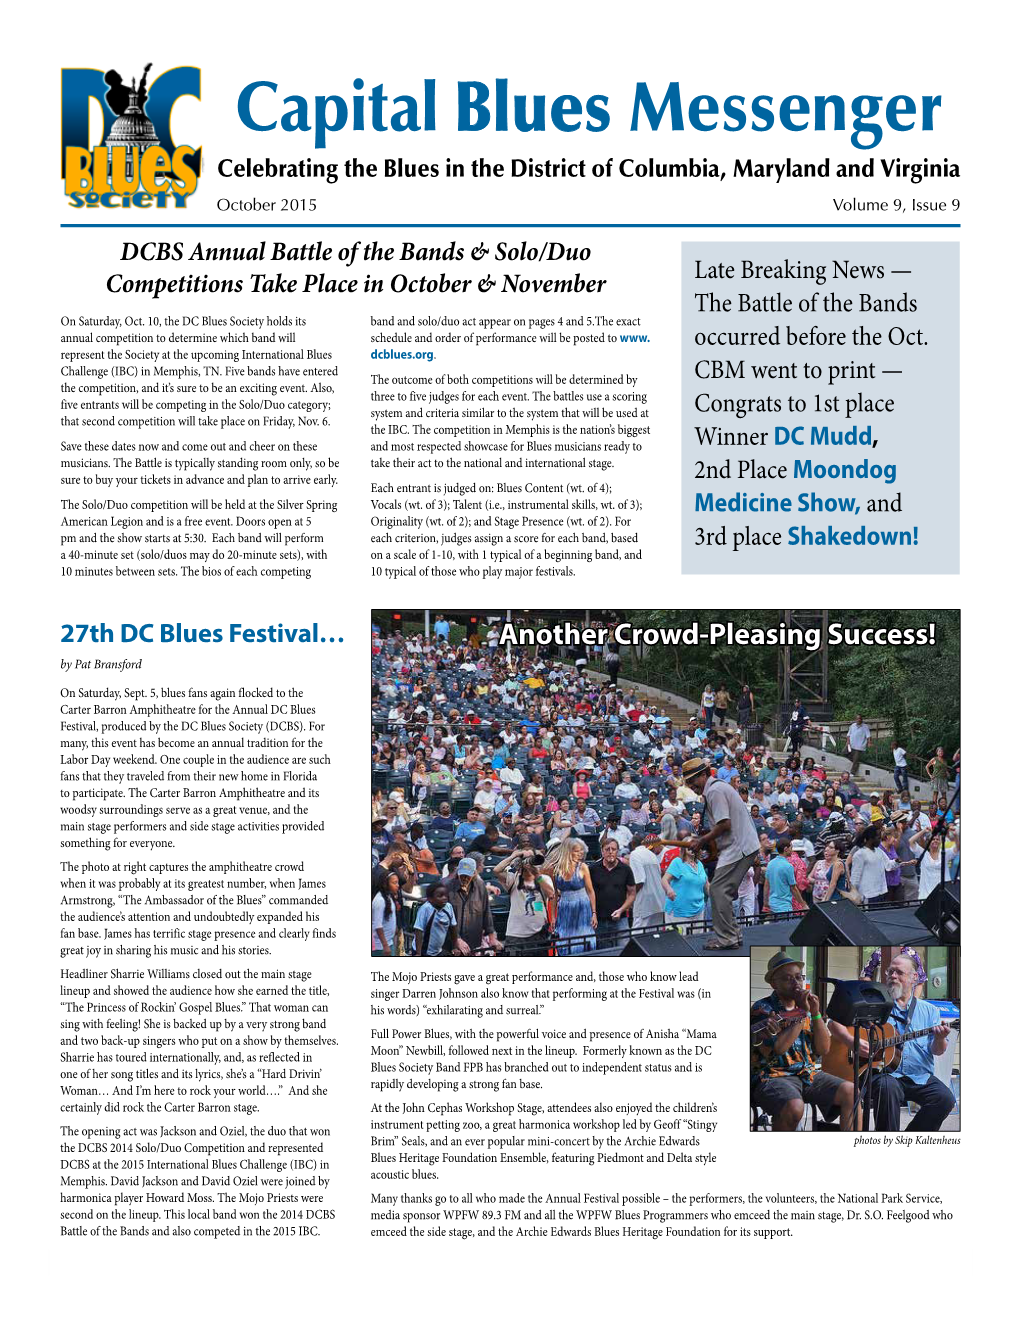 Capital Blues Messenger Celebrating the Blues in the District of Columbia, Maryland and Virginia October 2015 Volume 9, Issue 9